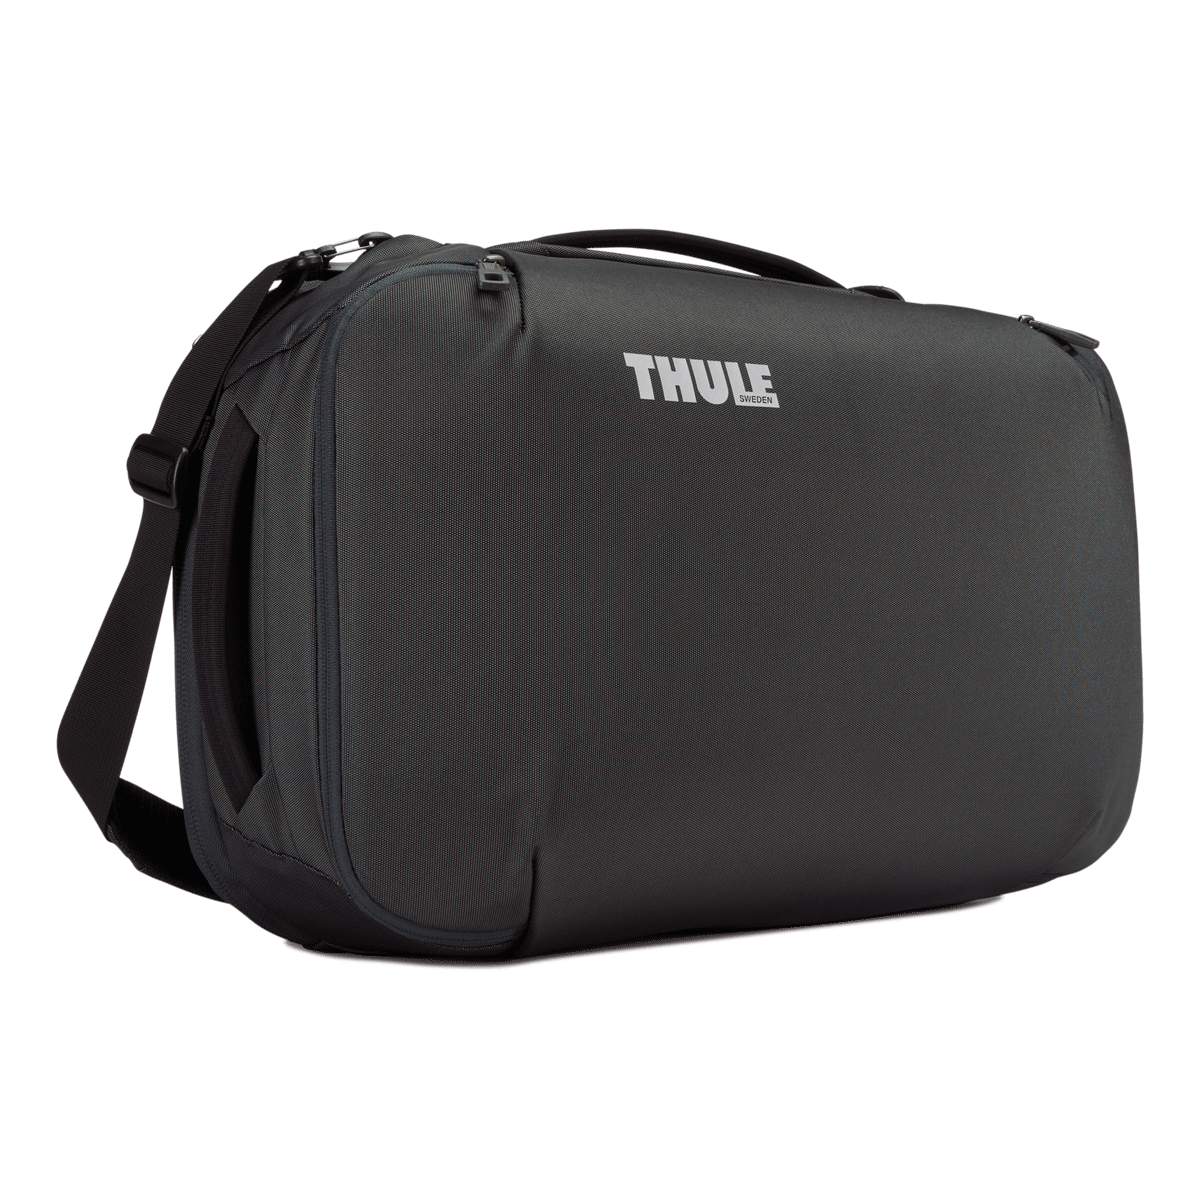 Thule Subterra convertible carry on luggage dark shadow gray